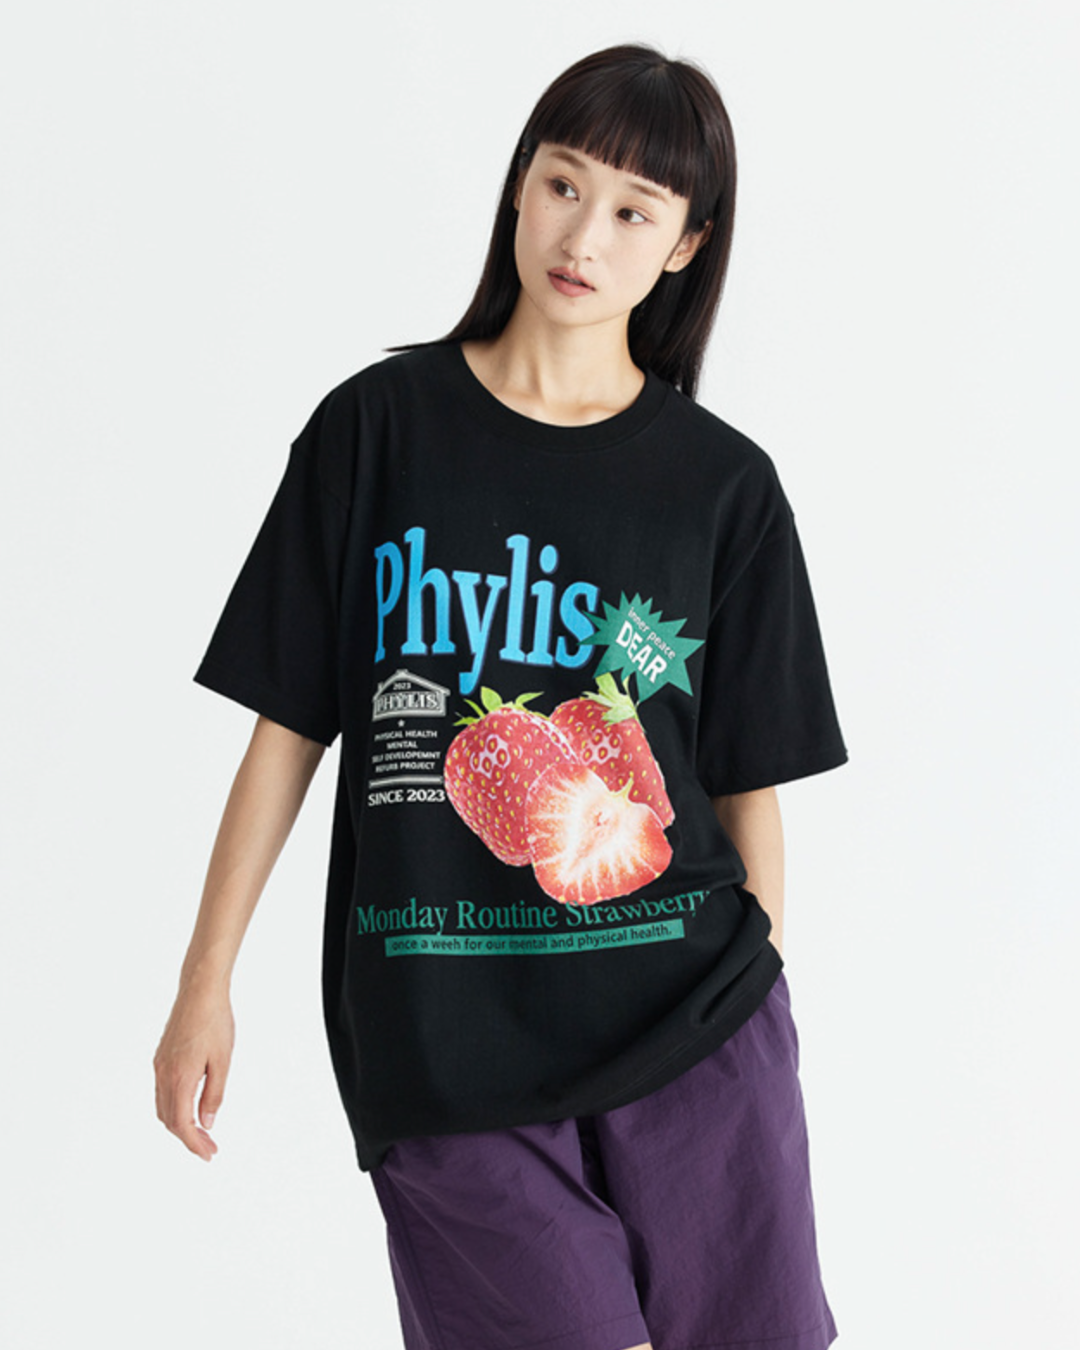 Phylis Oversized Tee in Black